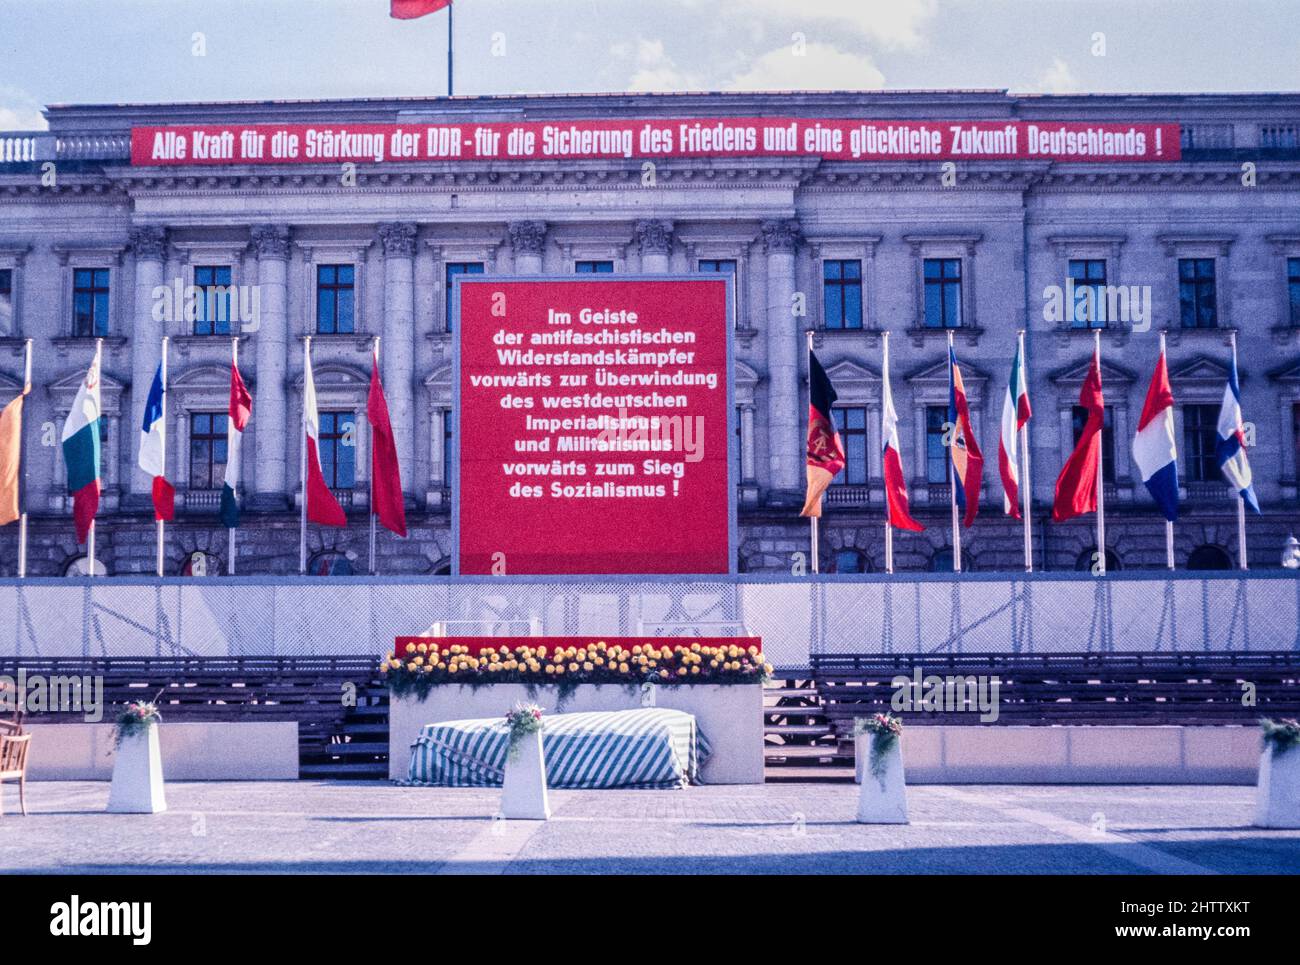 East Berlin, 1962. Communist Exhortations for Strengthening the DDR and Socialism and Defeating West German Imperialism. Stock Photo